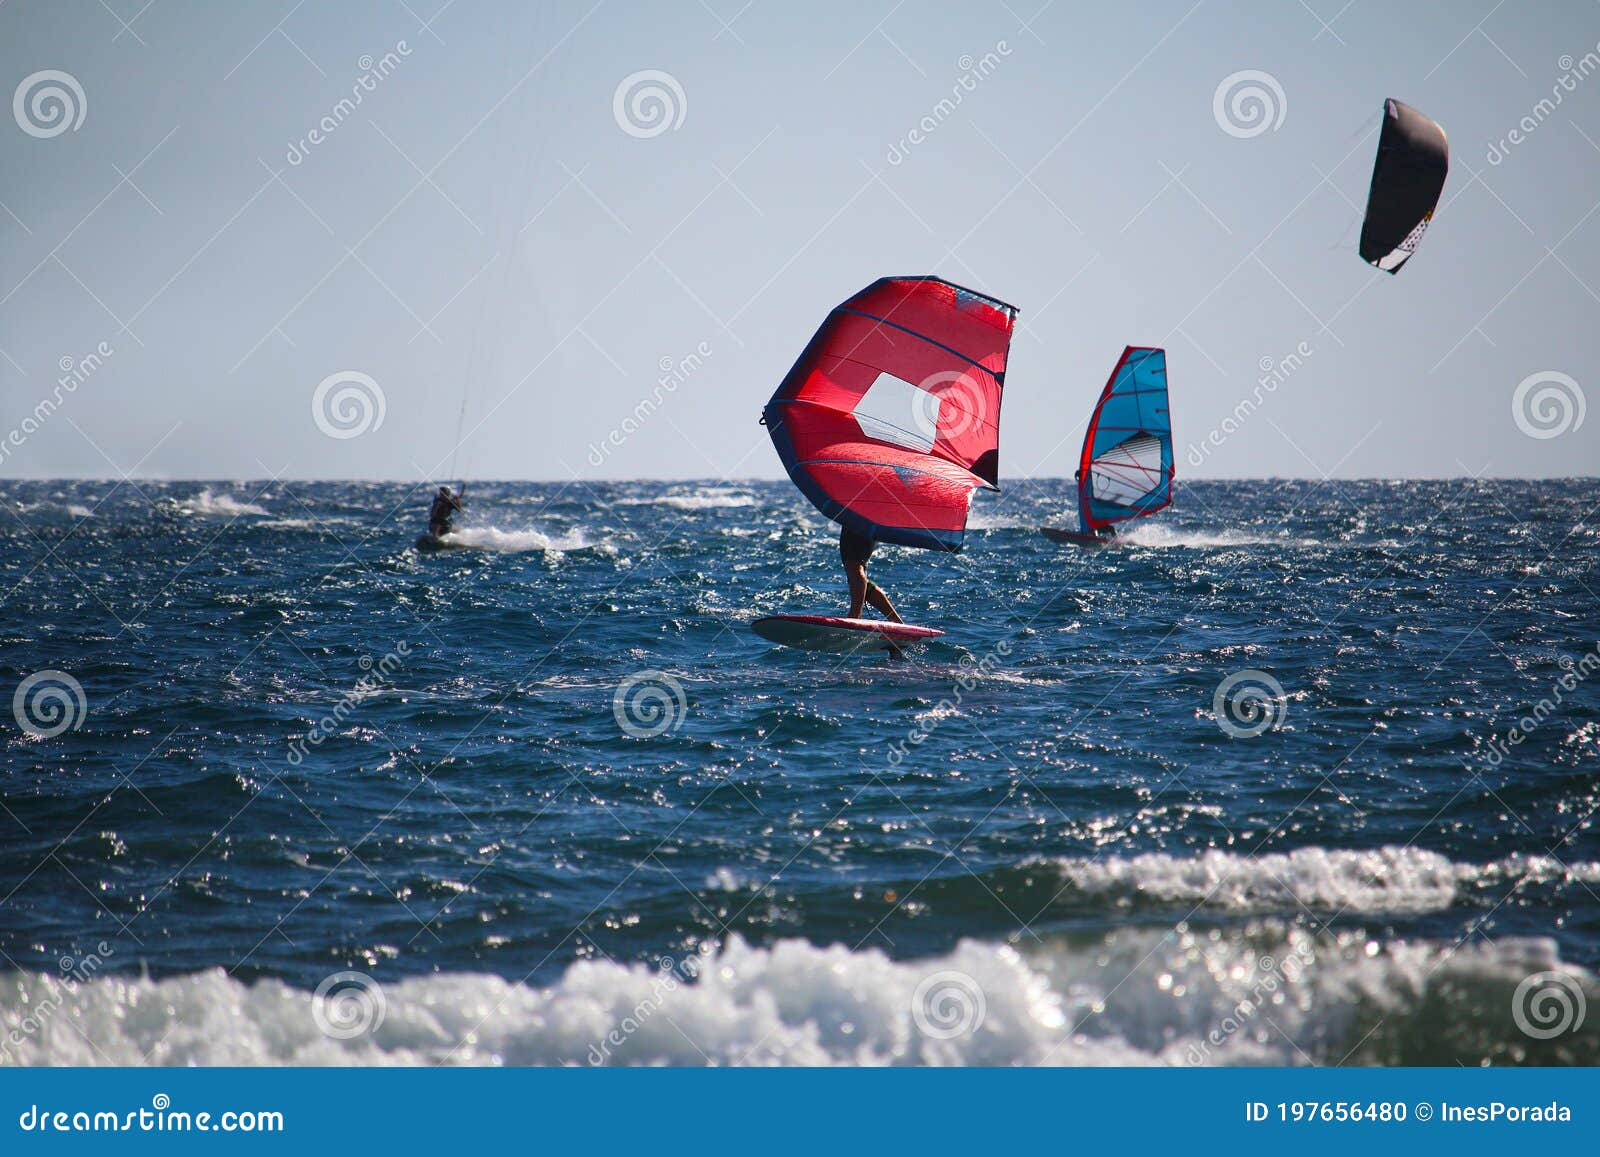 watersports windsurfing, wingfoiling and kiteboarding at the sea